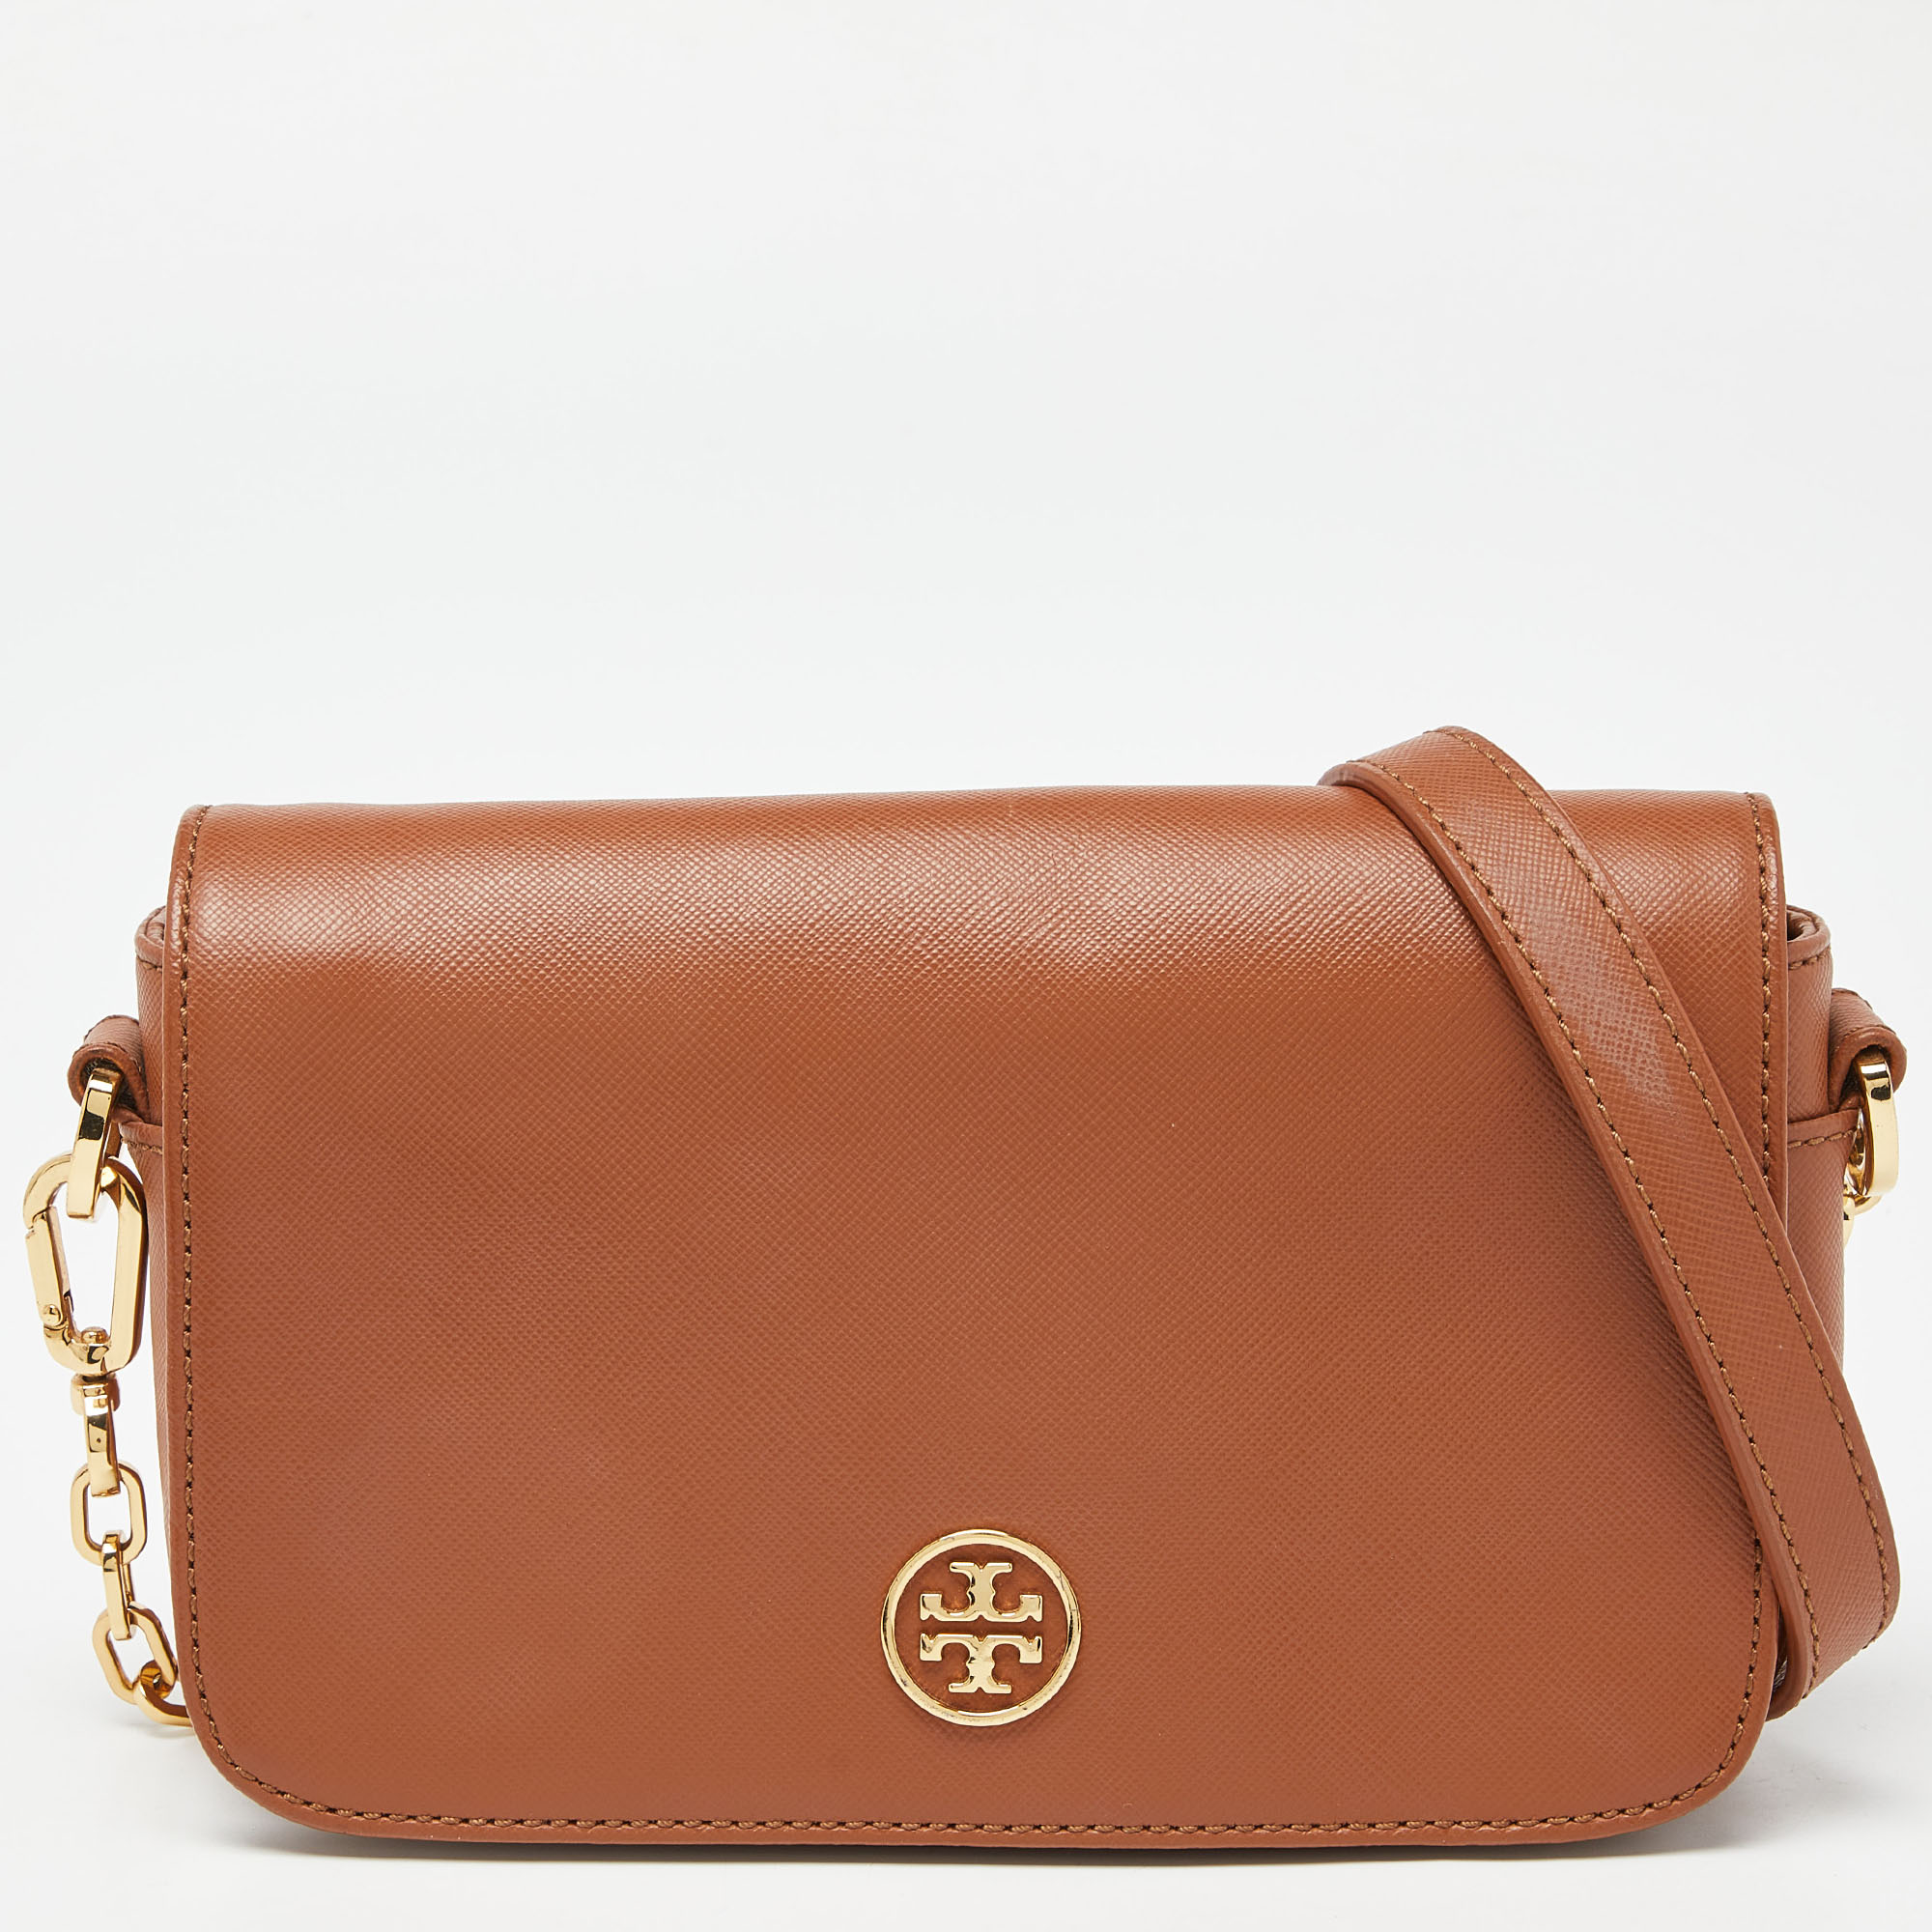 Pre-owned Tory Burch Brown Leather Robinson Chain Shoulder Bag